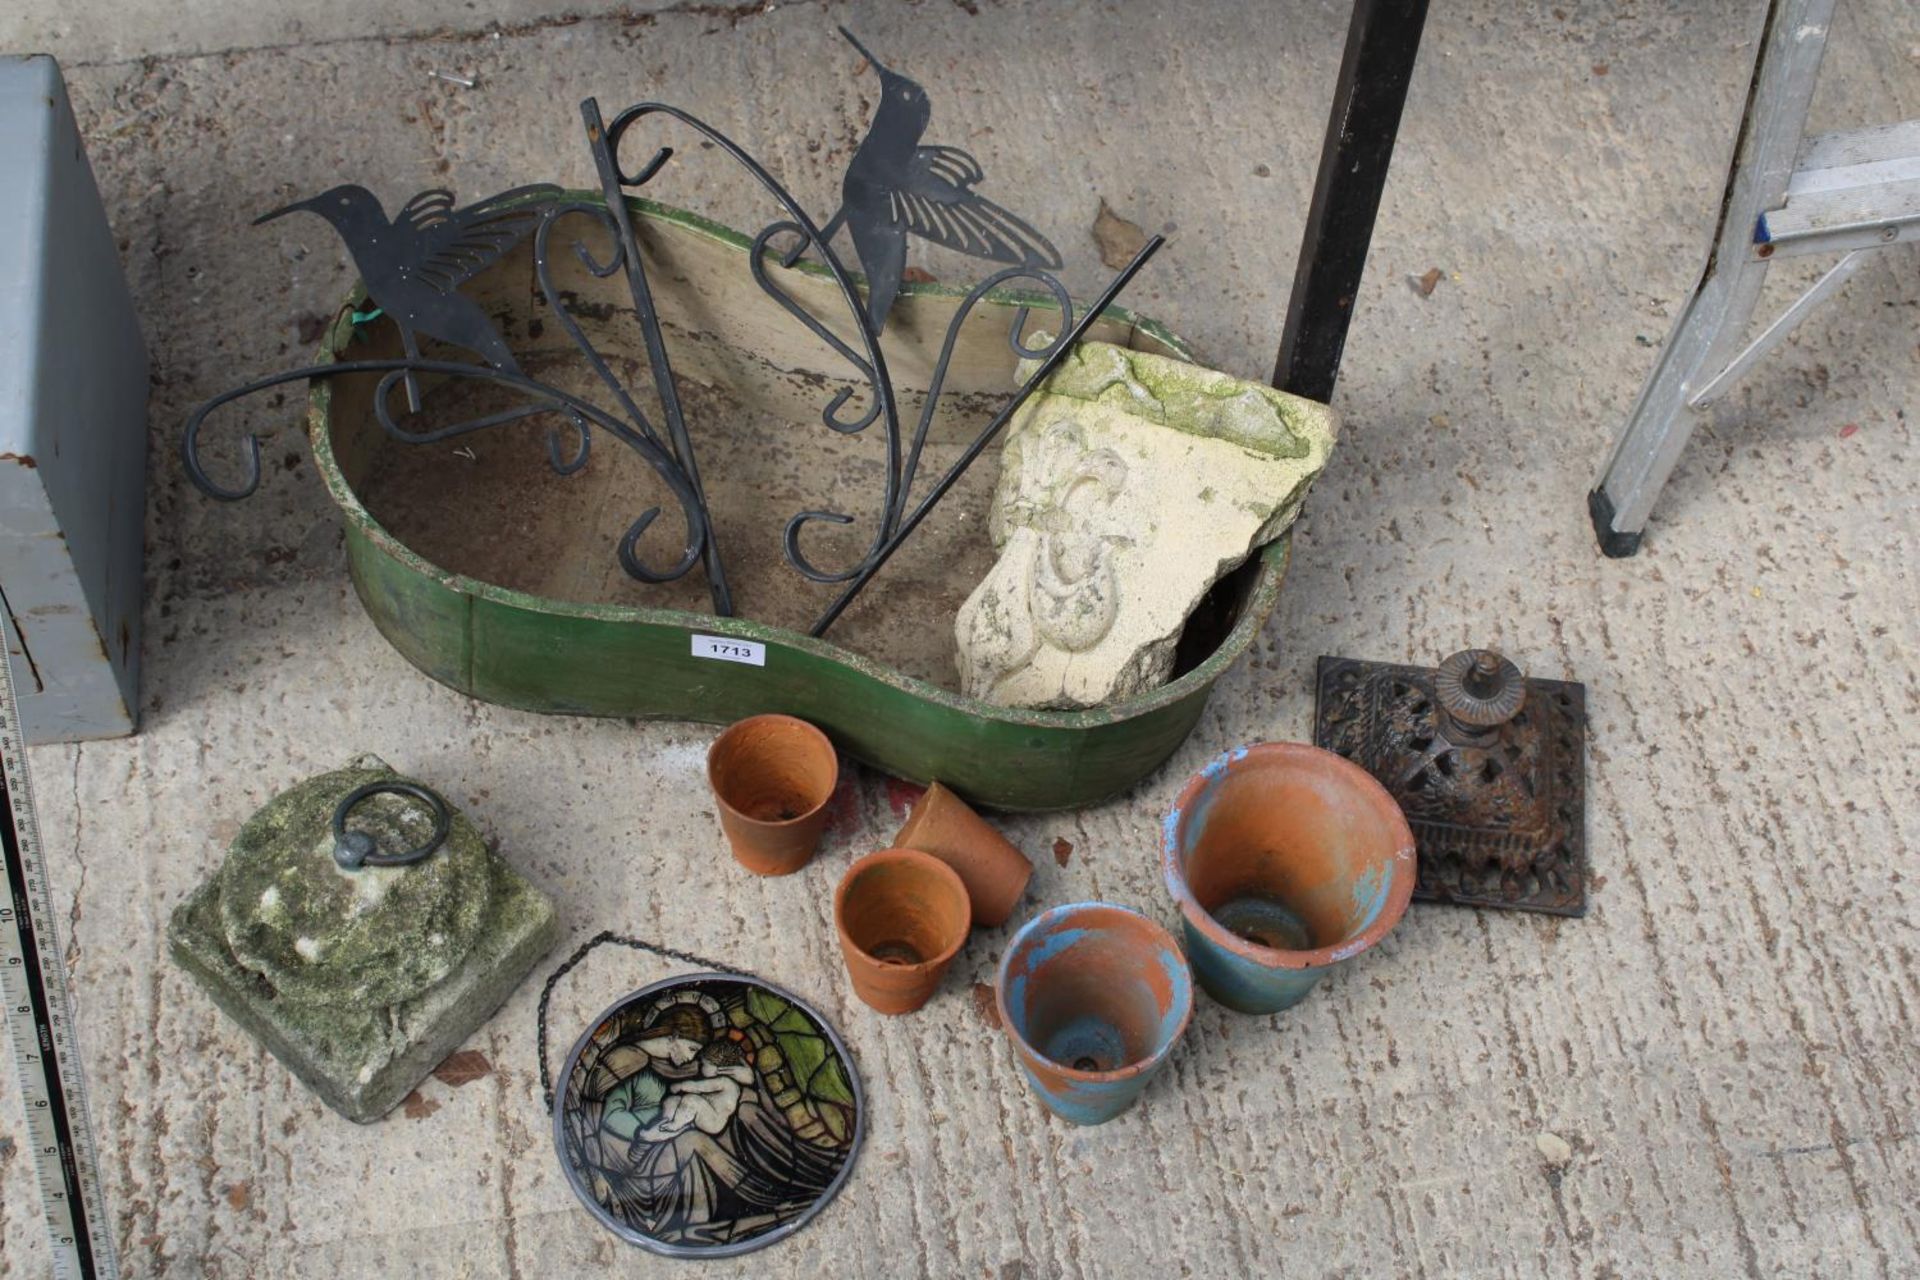 AN ASSORTMENT OF ITEMS TO INCLUDE A CONCRETE DOOR STOP, TERRACOTTA POTS AND A TIN DISH ETC